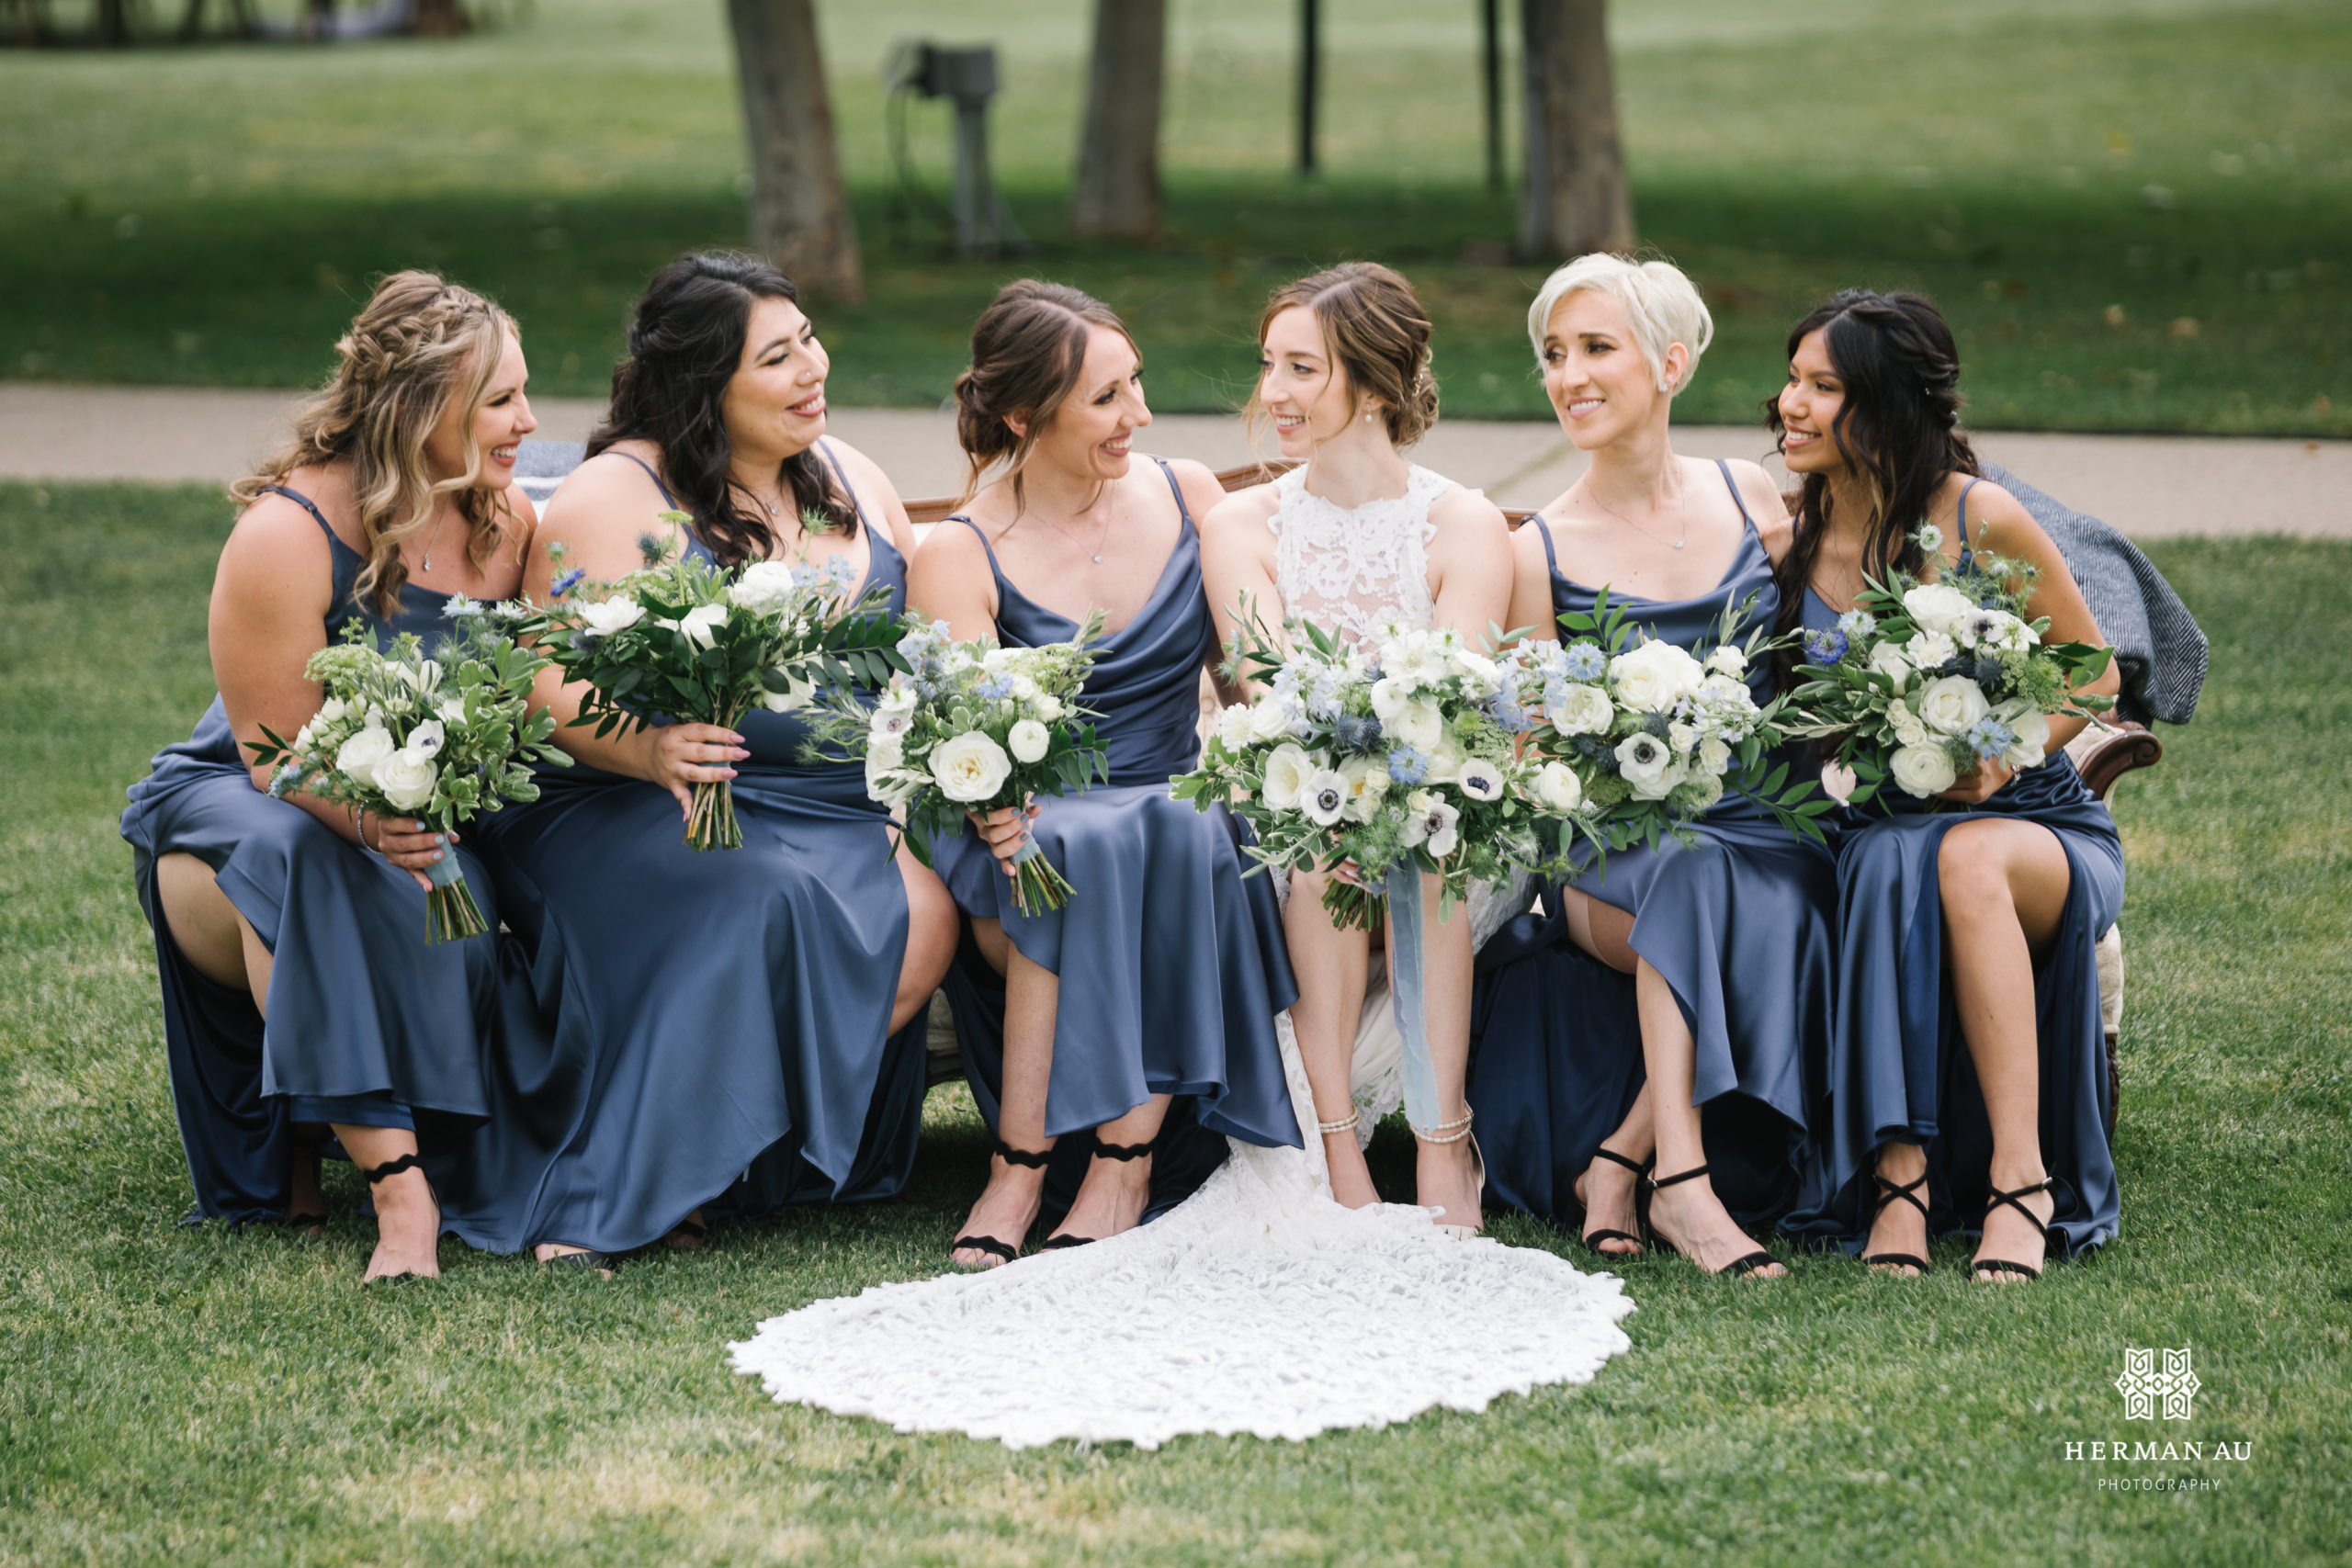 bride in high neckline lace wedding dress and white and blue bridal bouquet sits on couch with bridesmaids in dark blue satin dresses